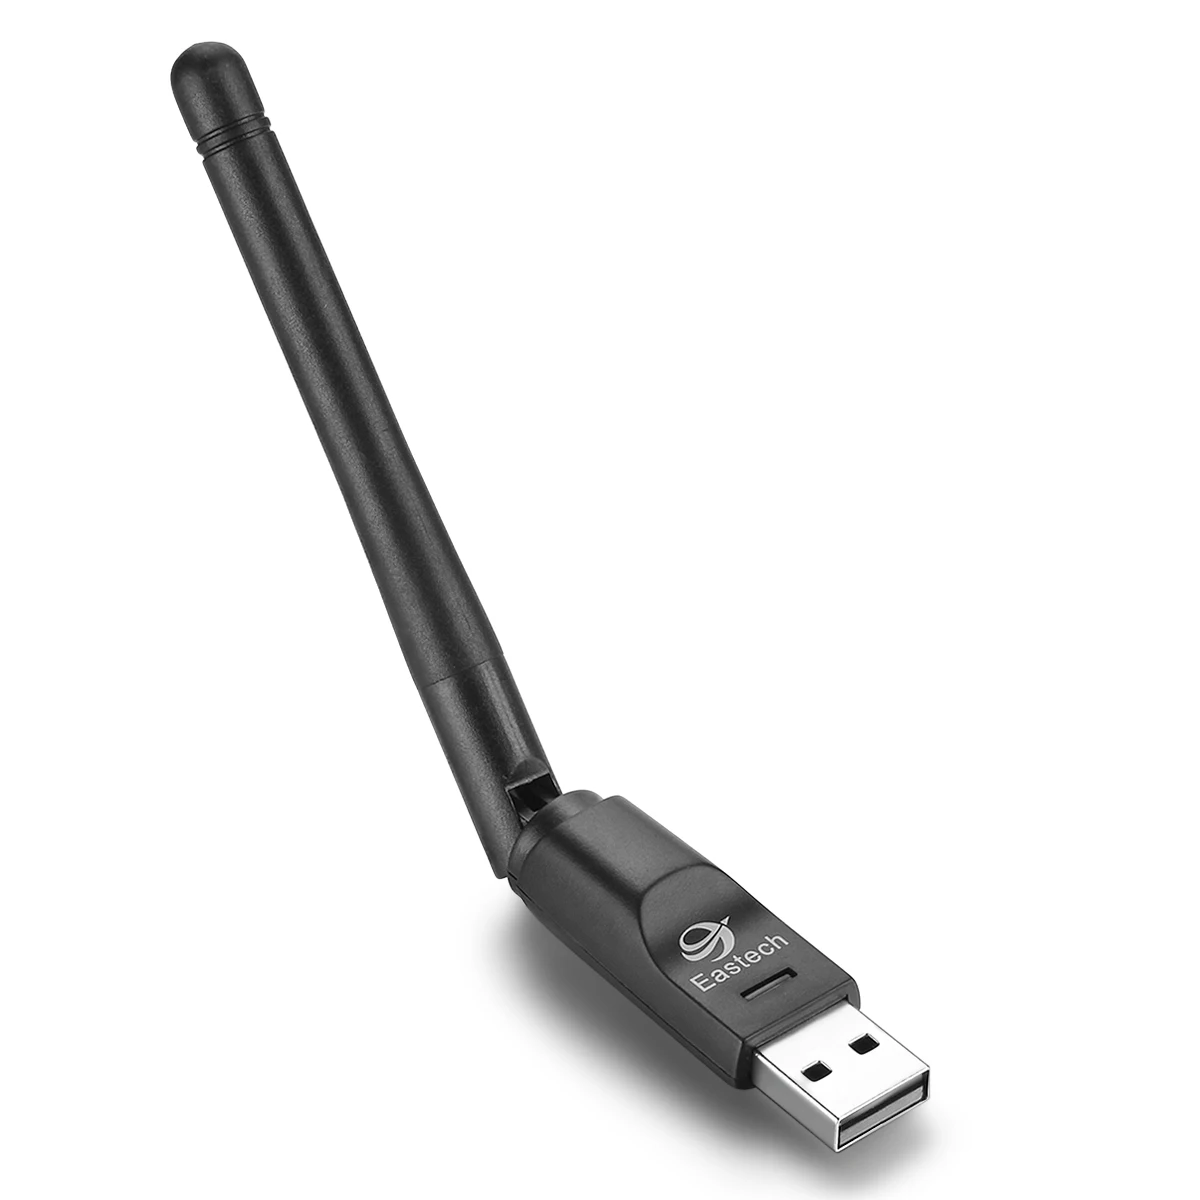 

Portable 150Mbps MTK7601 Wireless USB WiFi Adapter Dongle Network Card 802.11b/g/n LAN Adapter with Rotatable Antenna, Black